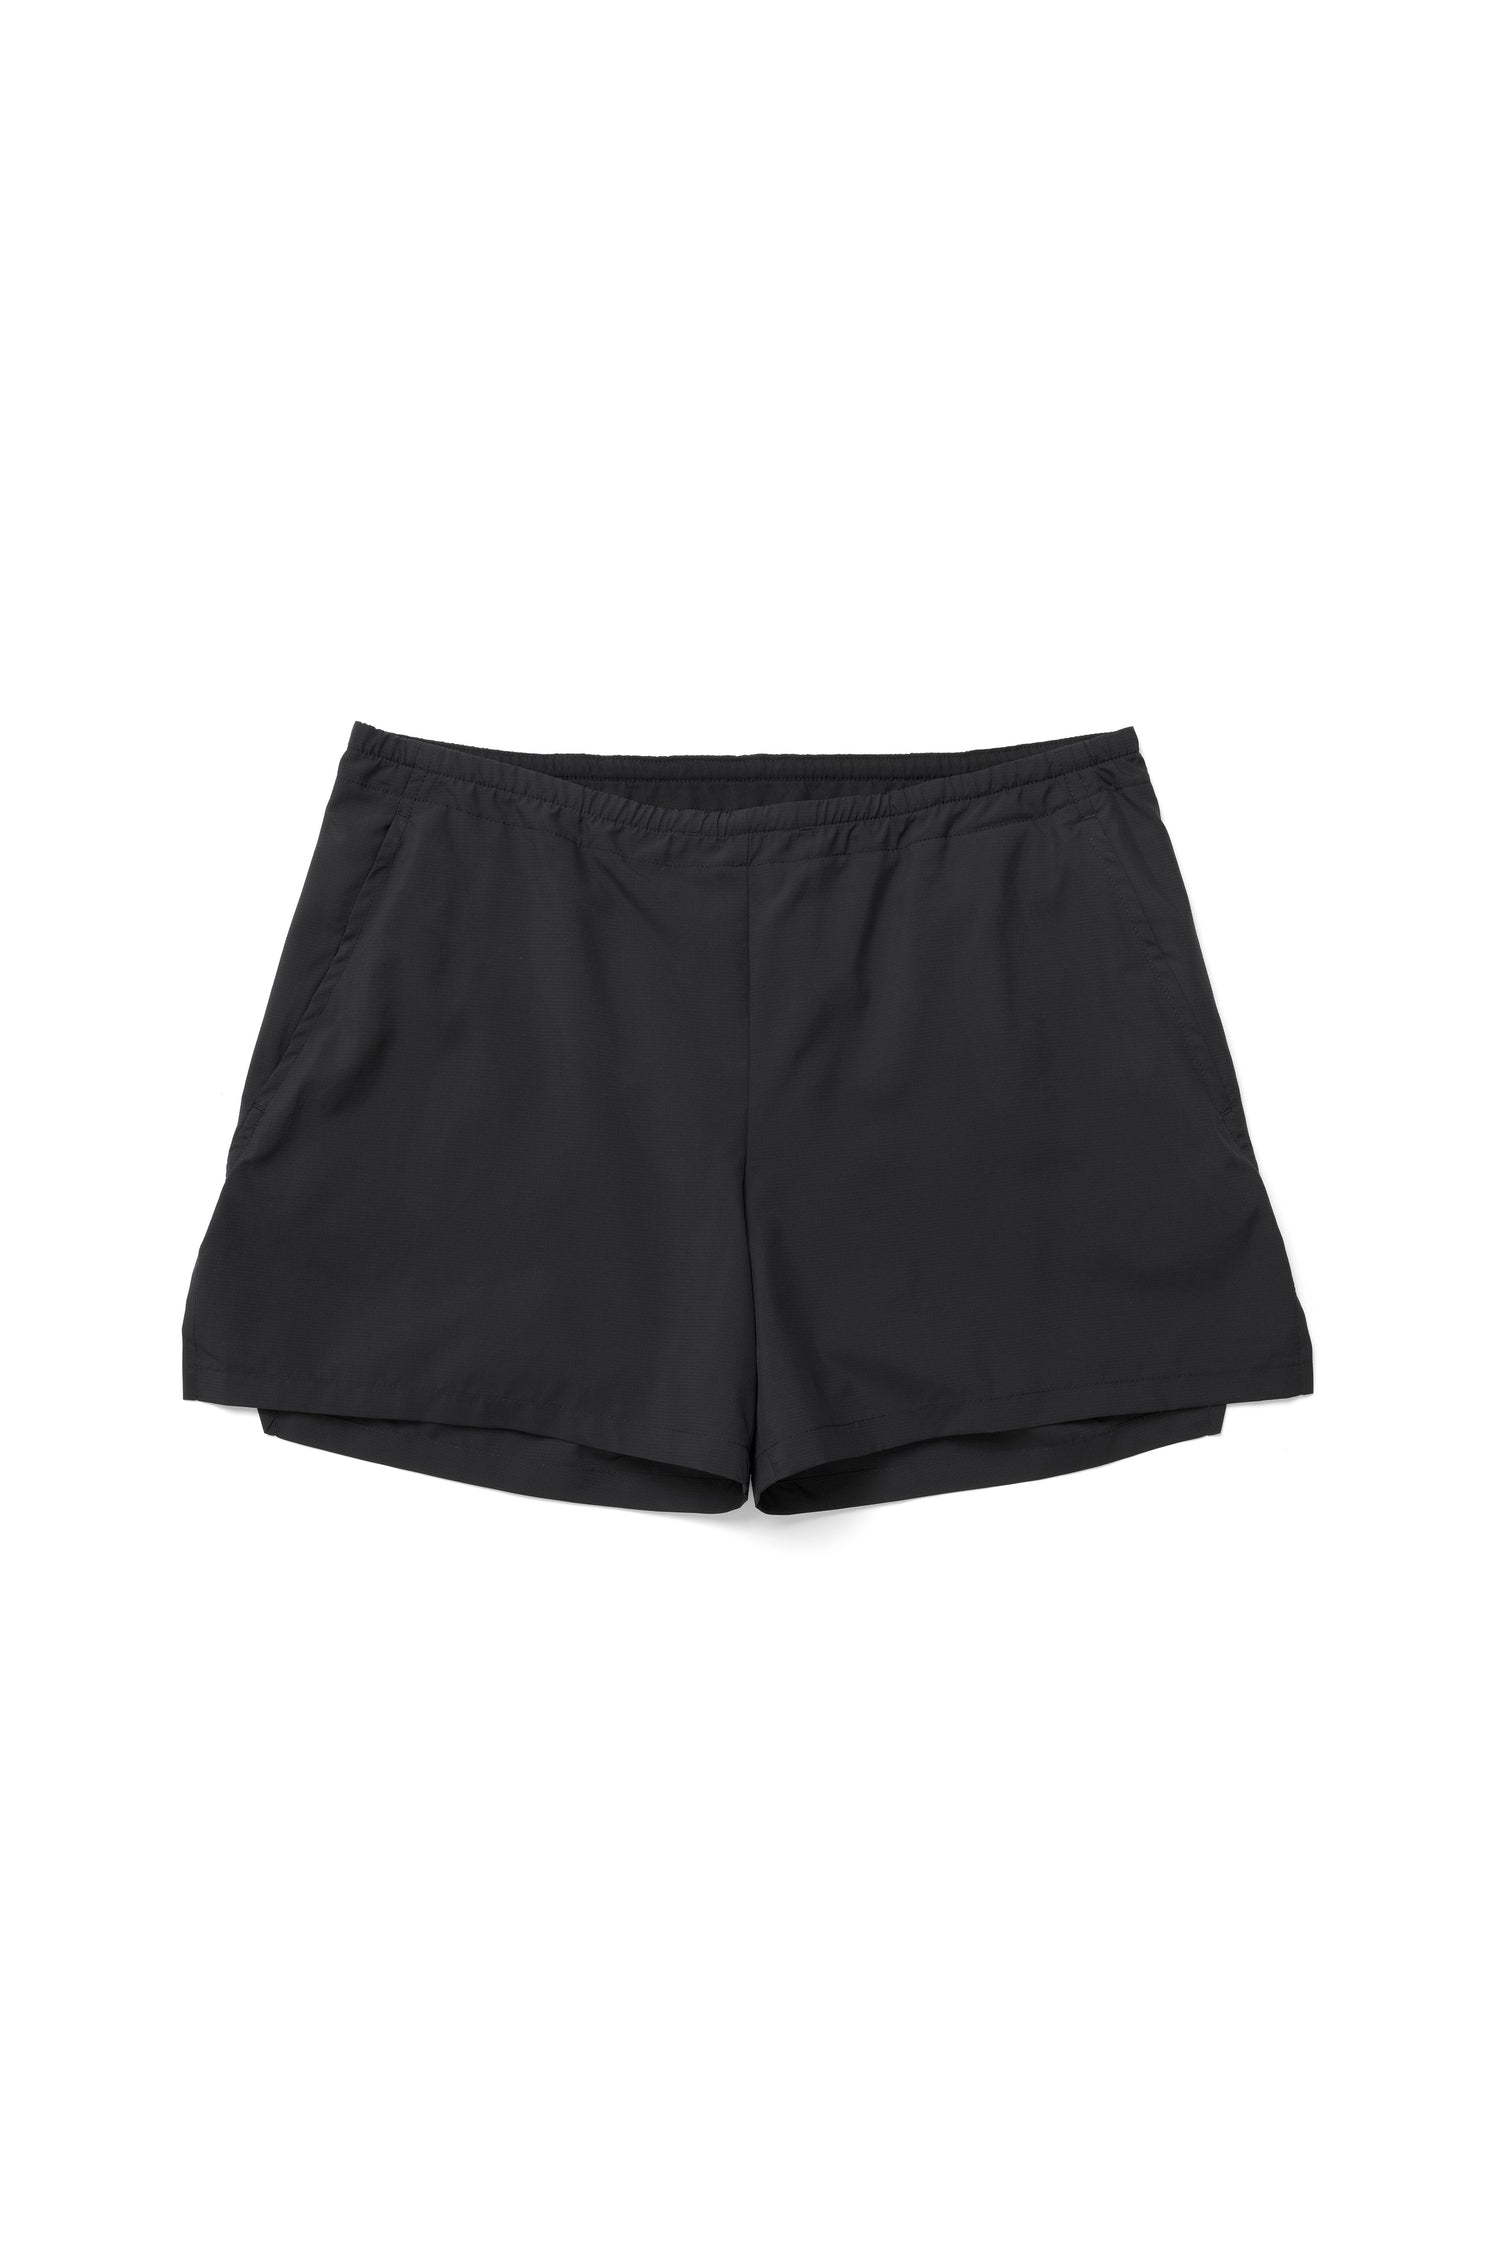 Houdini W's Pace Wind Shorts - 100% recycled polyester True Black Pants